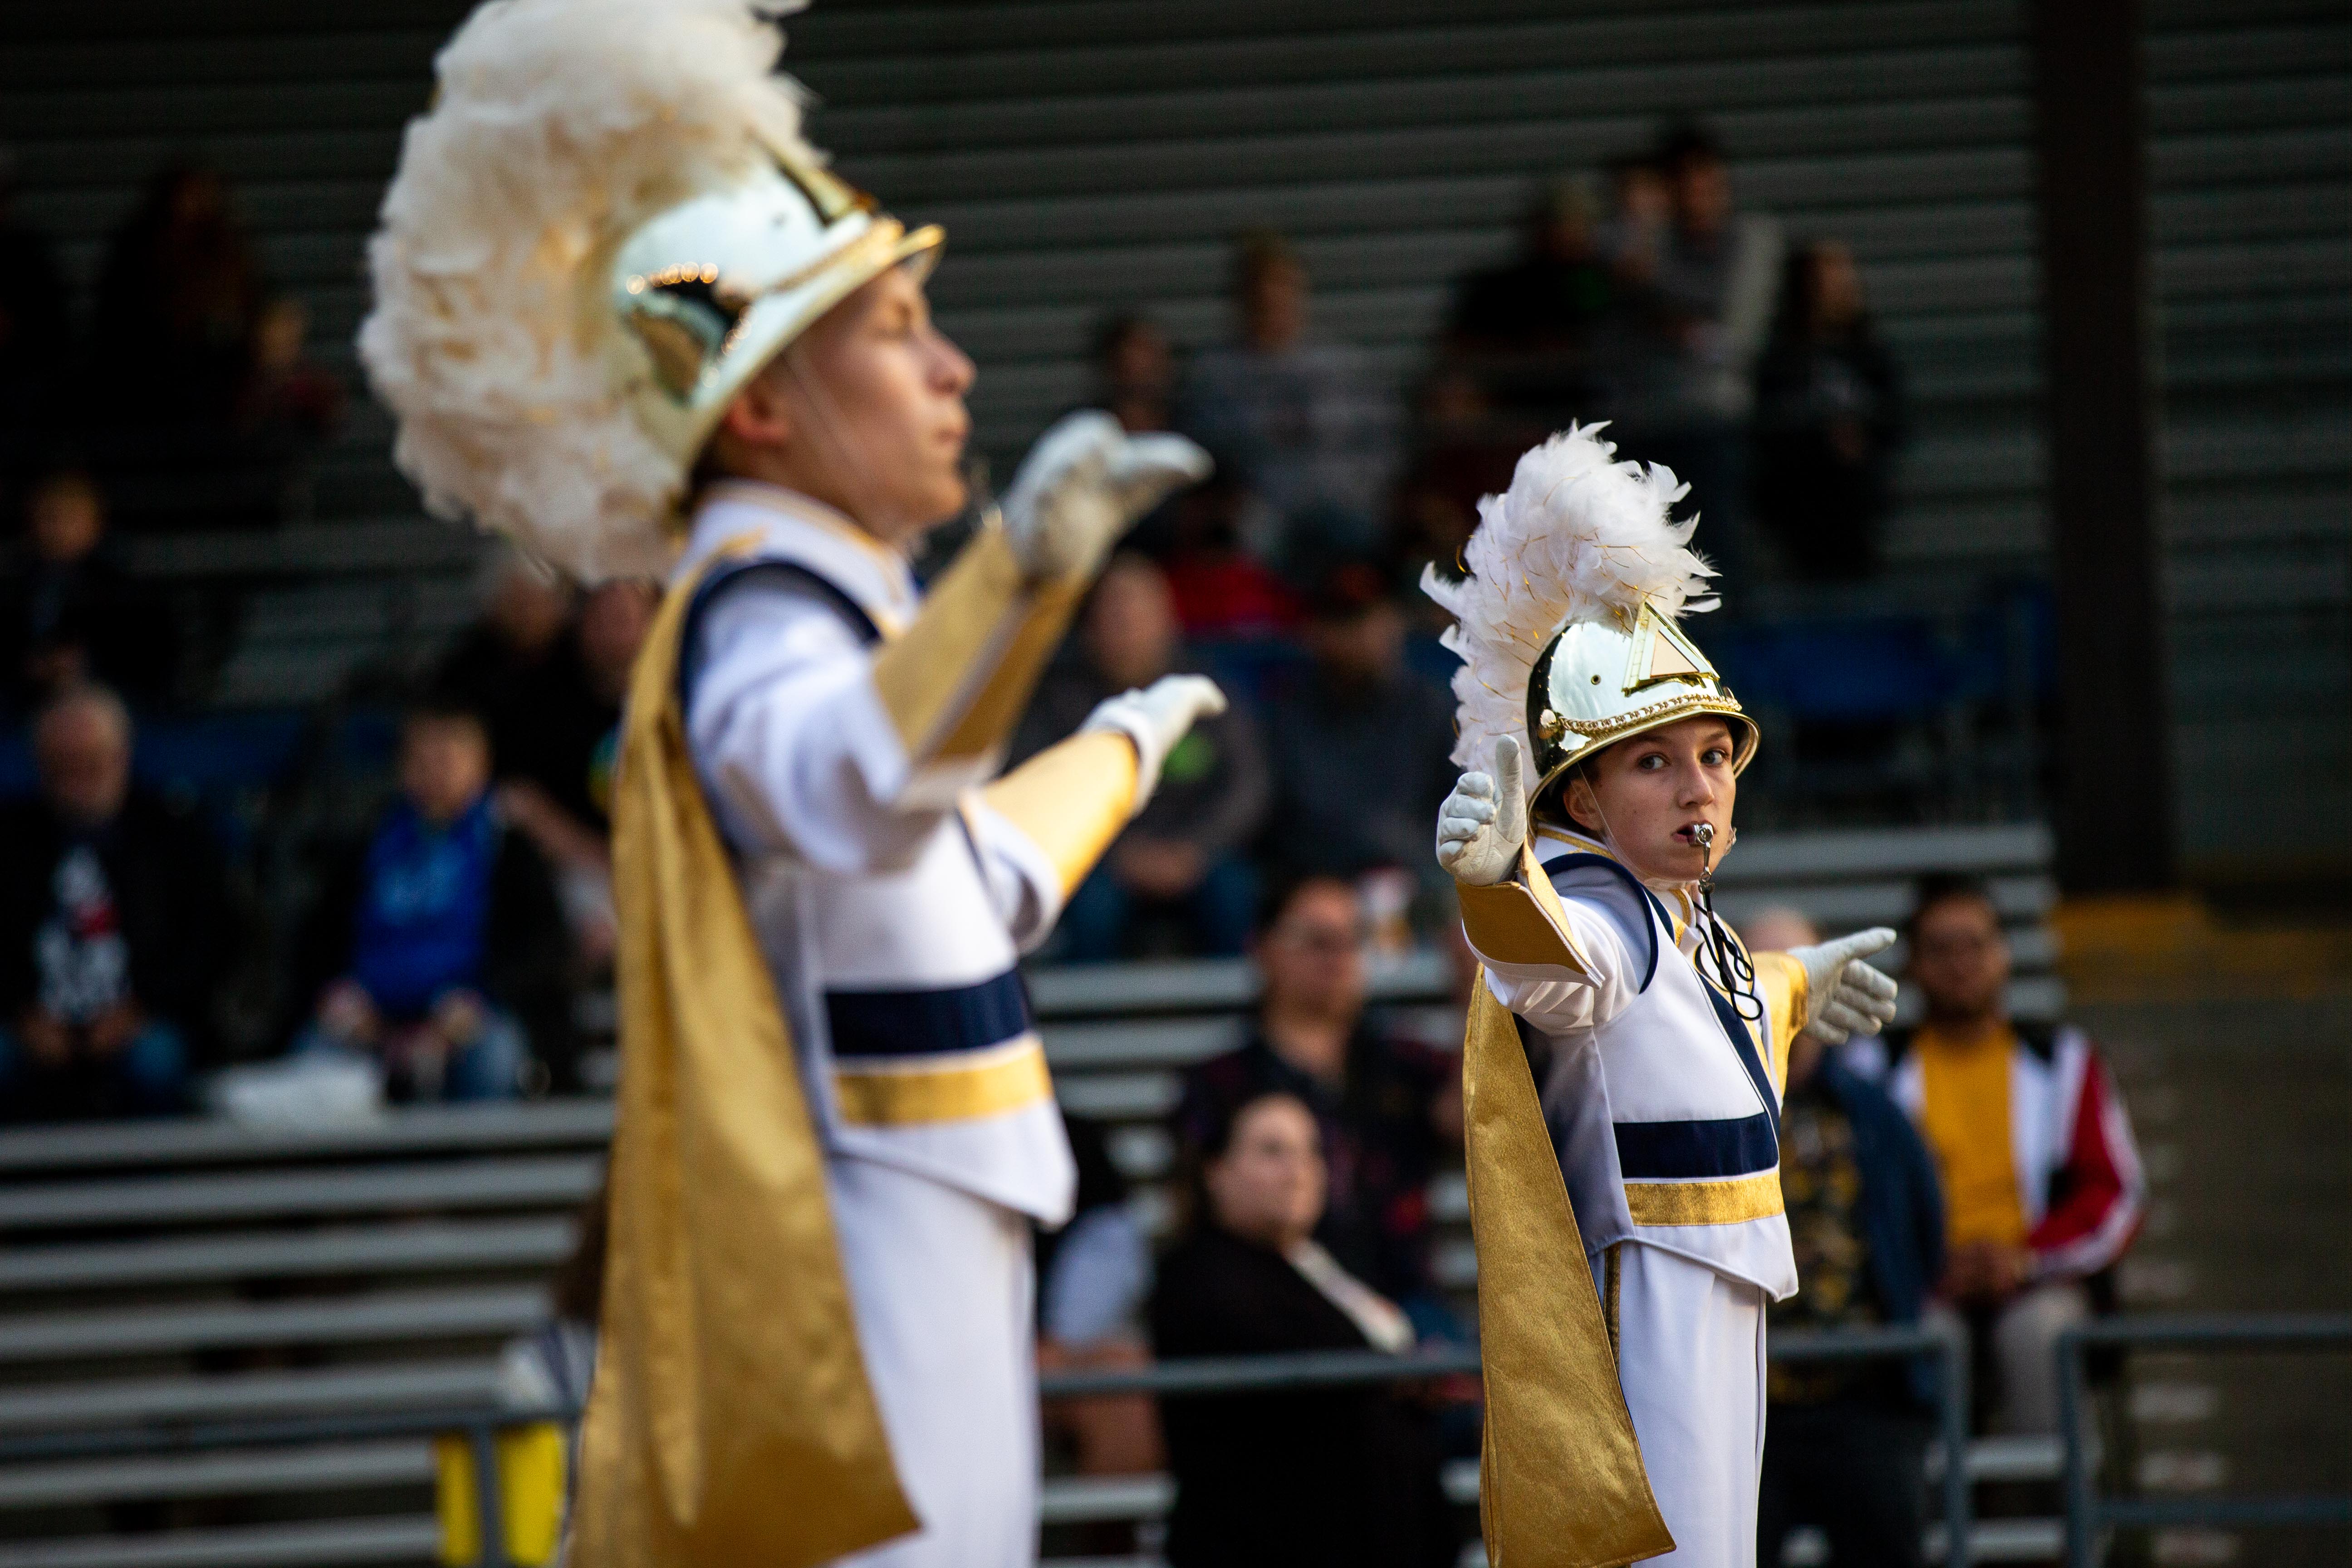 Drum majors of the Otswego Marching Band lead their ensamble through the grandstands Monday, Sept. 12, 2022, in Allegan.